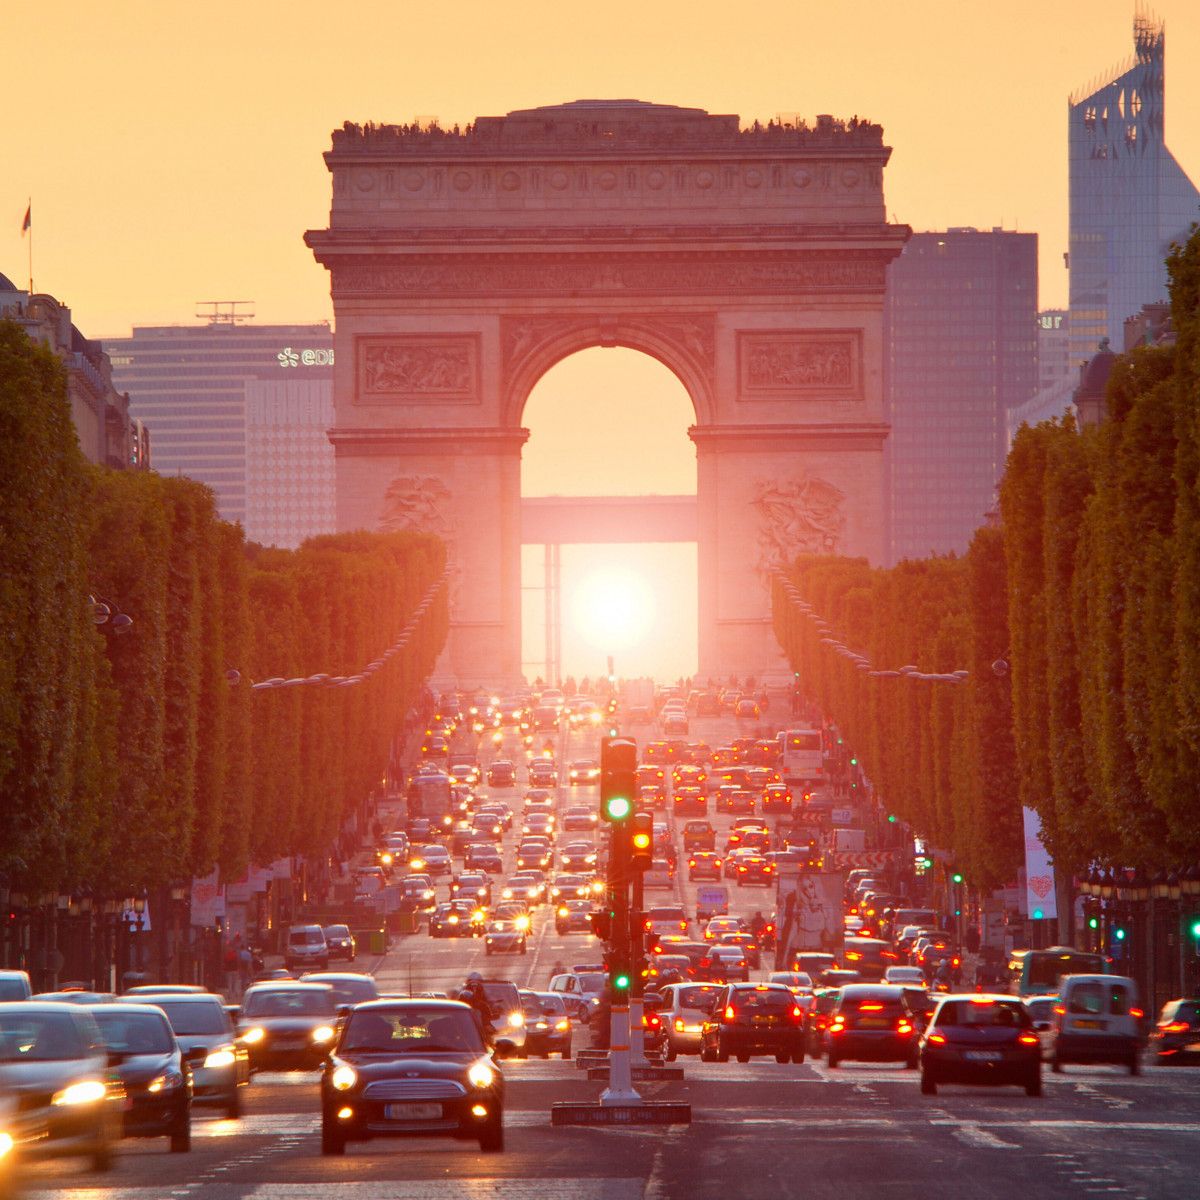 5 Things to do When Visiting the Champs Elysées in Paris